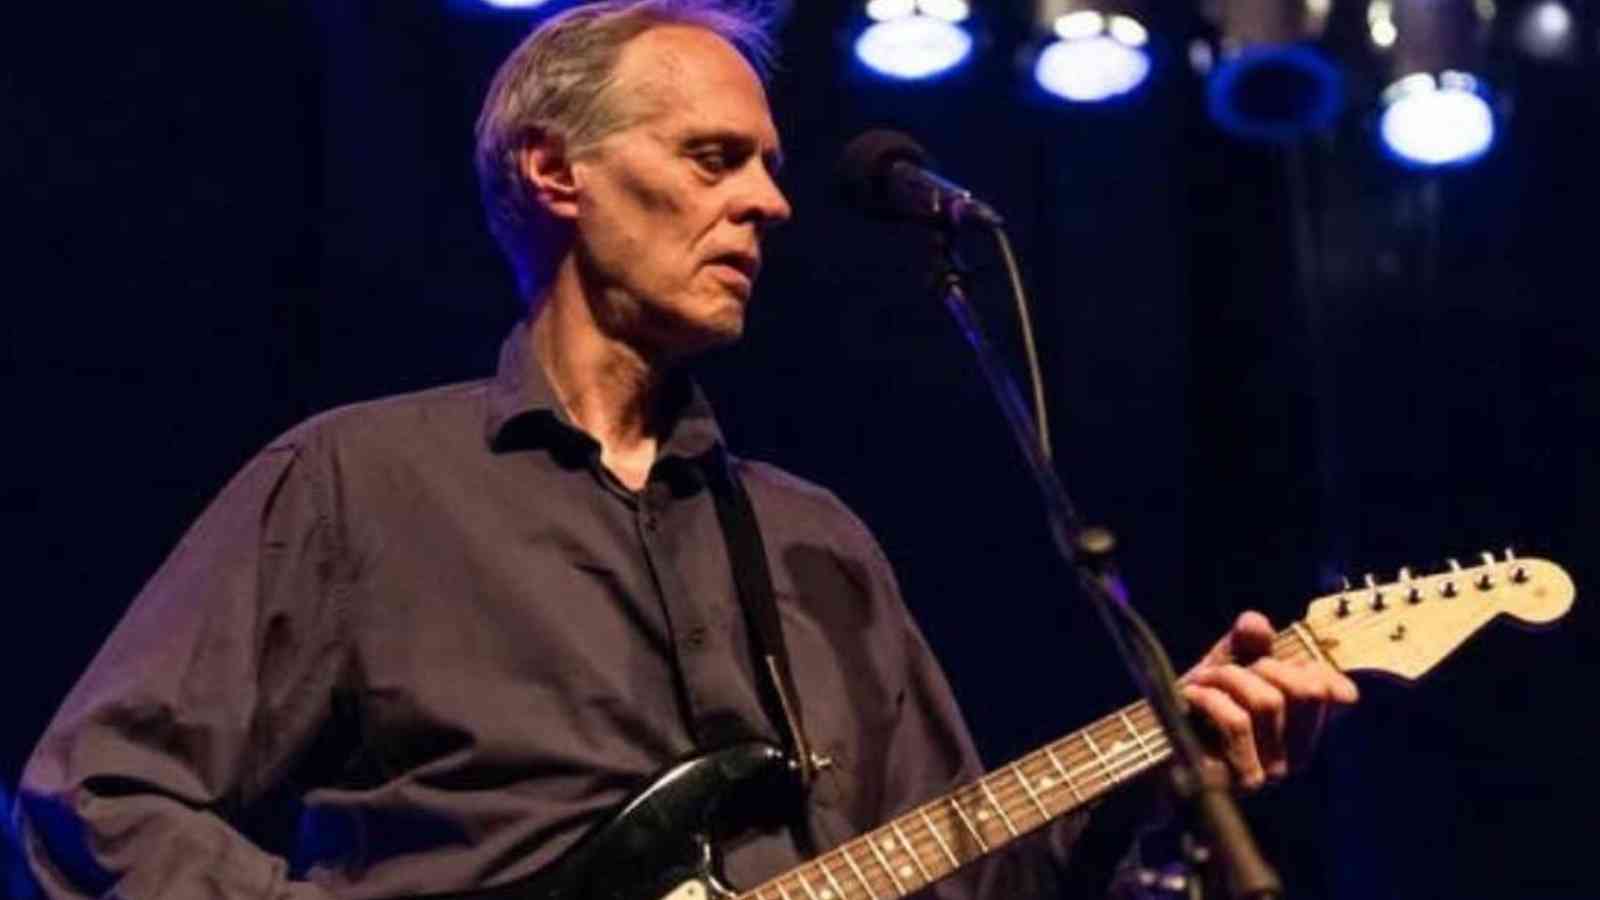 Tom Verlaine Cause of Death? Passed Away at 73